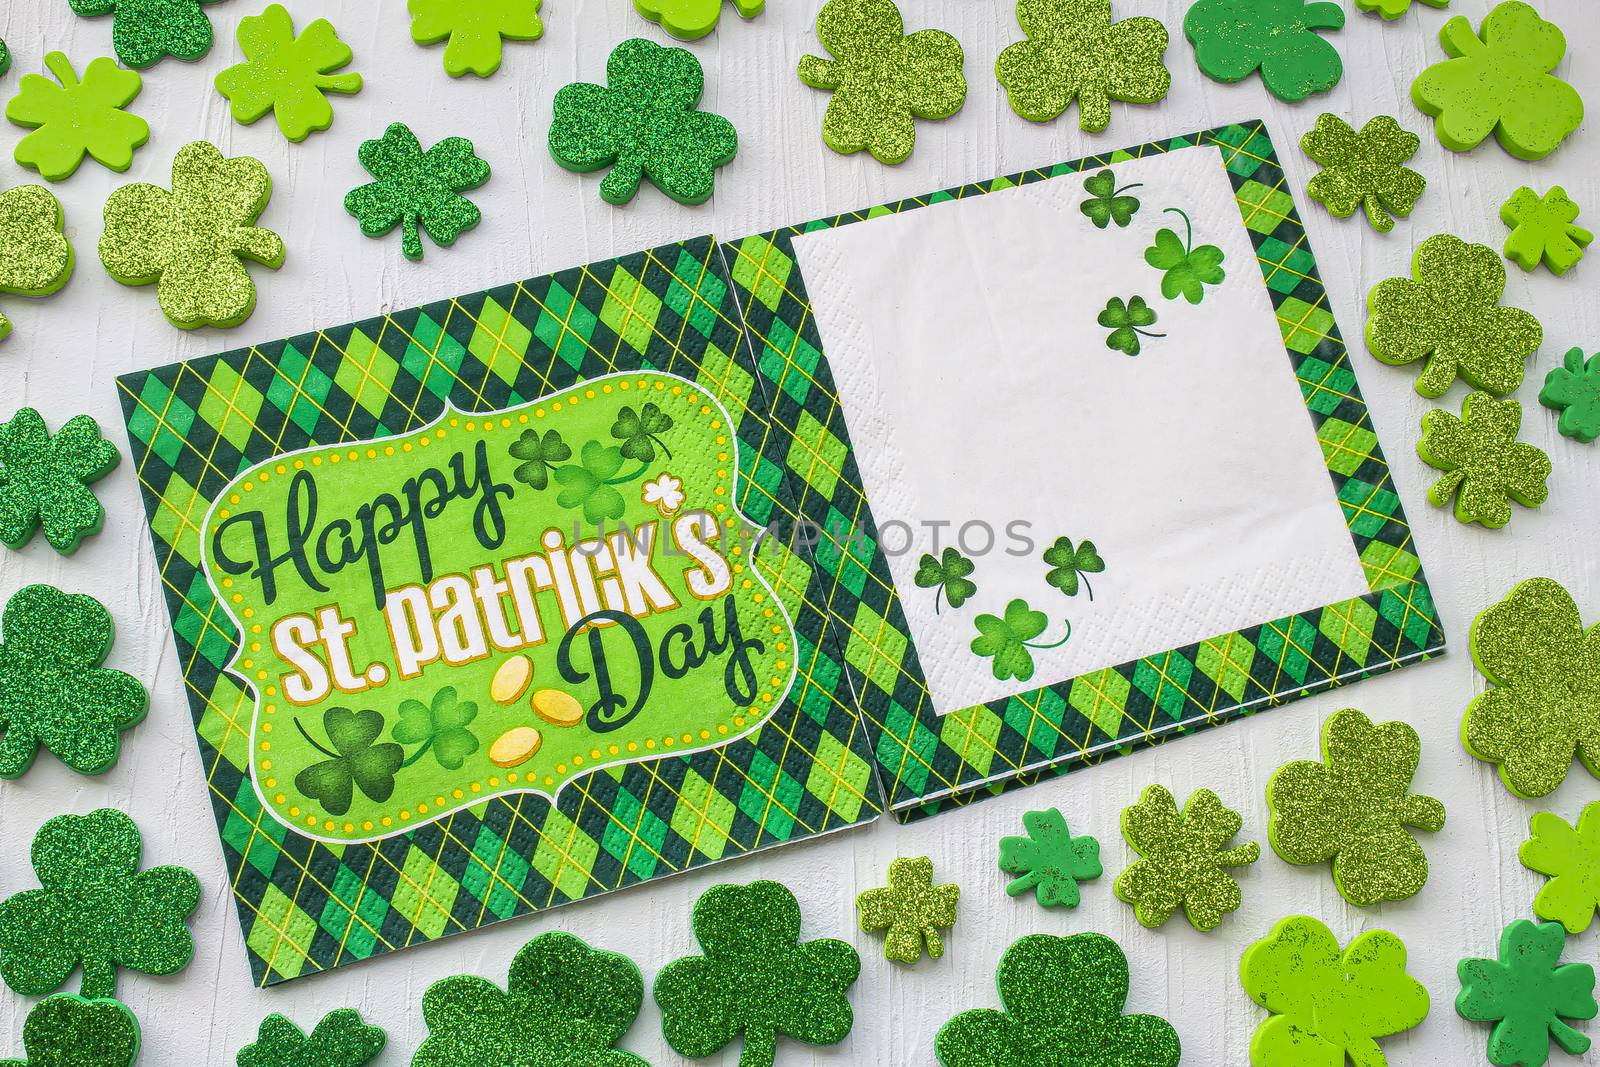 St Patrick's Day napkins surrounded by green clovers